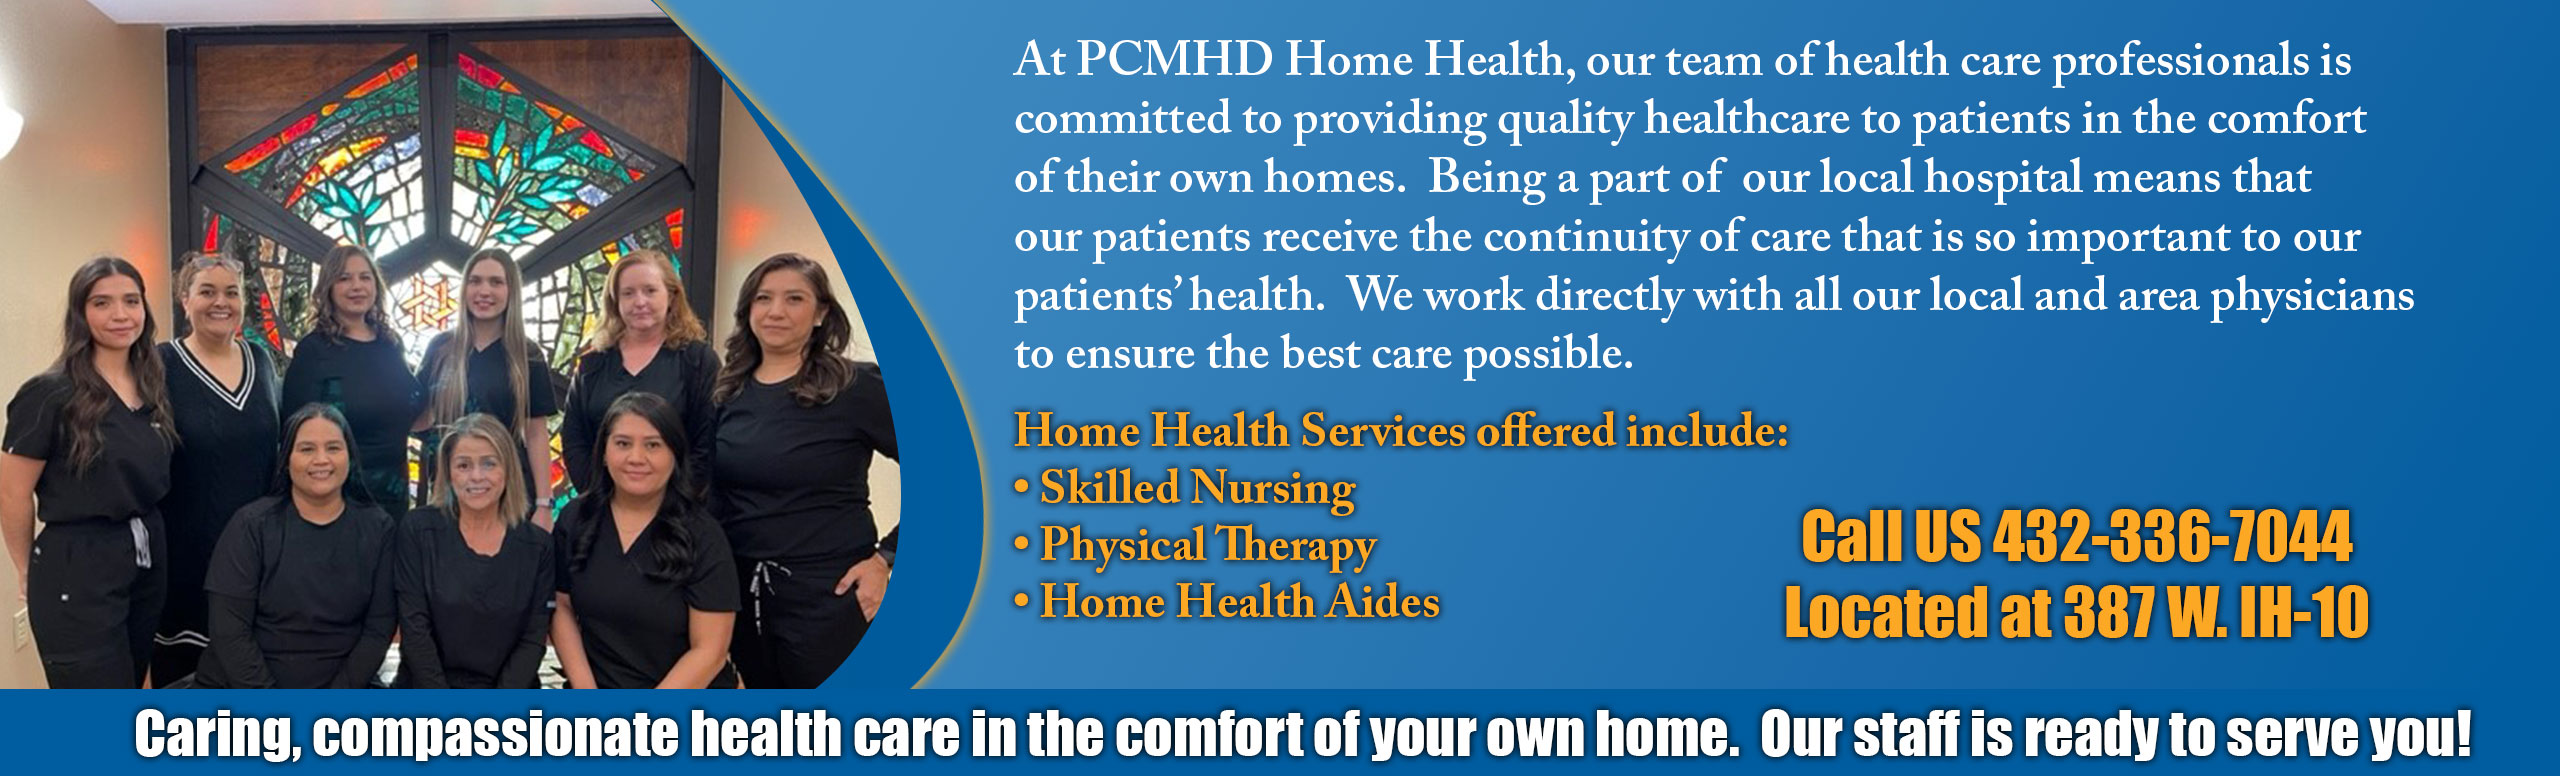 At PCMHD Home Health, our team of health care professionals is committed to providing quality healthcare to patients in the comfort of their own homes. Being a part of our local hospital means that our patients receive the continuity of care that is so important to our patient's health. We work directly with all our local and area physicians 

Home Health Services offered include:

-Skill Nursing 
-Physical Therapy 
-Home Health Aides

Call us 432-336-7044
Located at 387 W. IH-10

Caring, compassionate health care in the comfort of your own home. Our staff is ready to serve you!